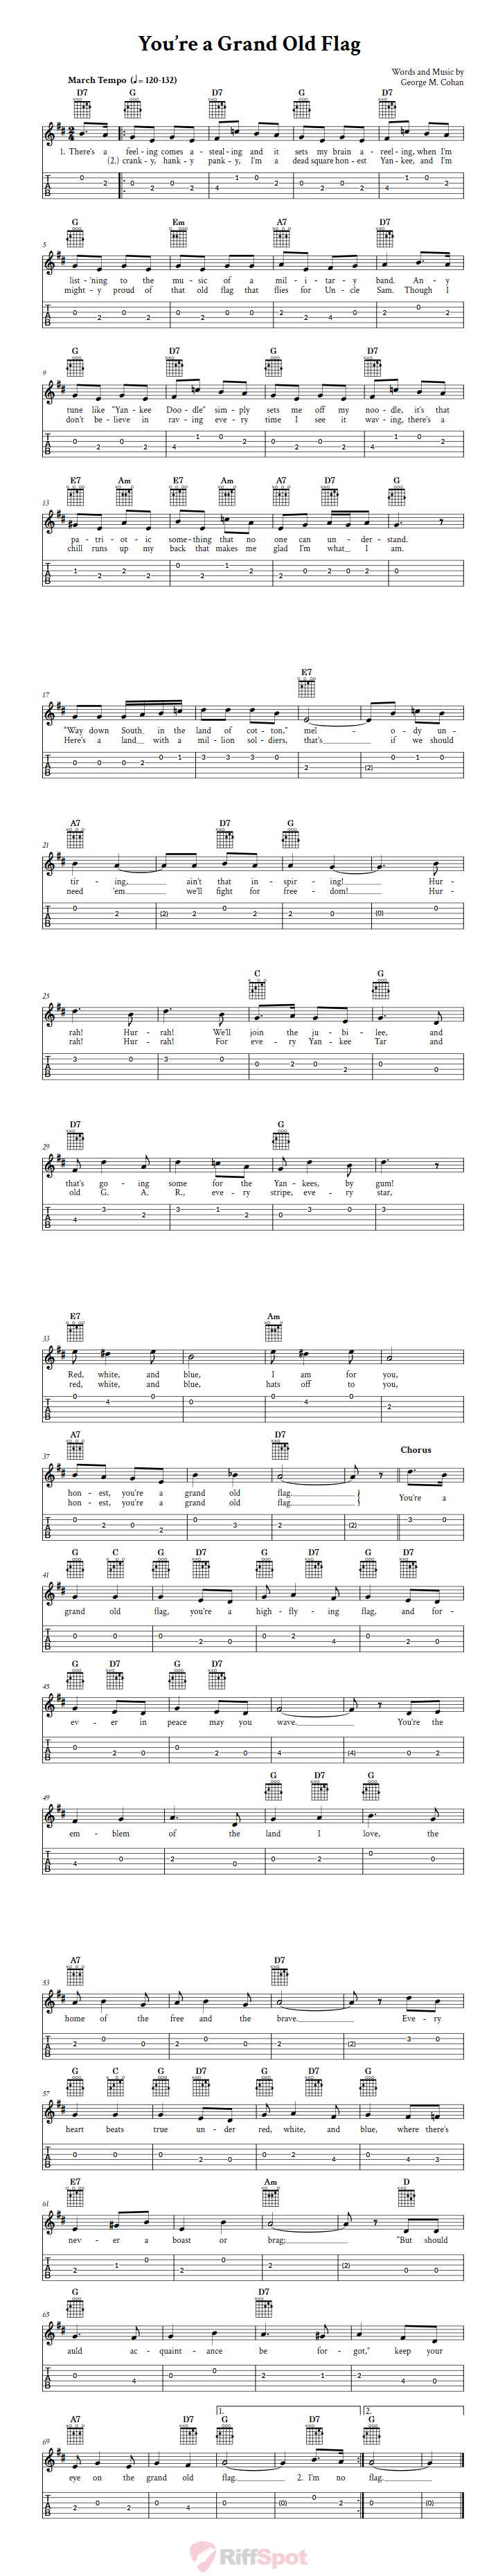 You're a Grand Old Flag Guitar Tab